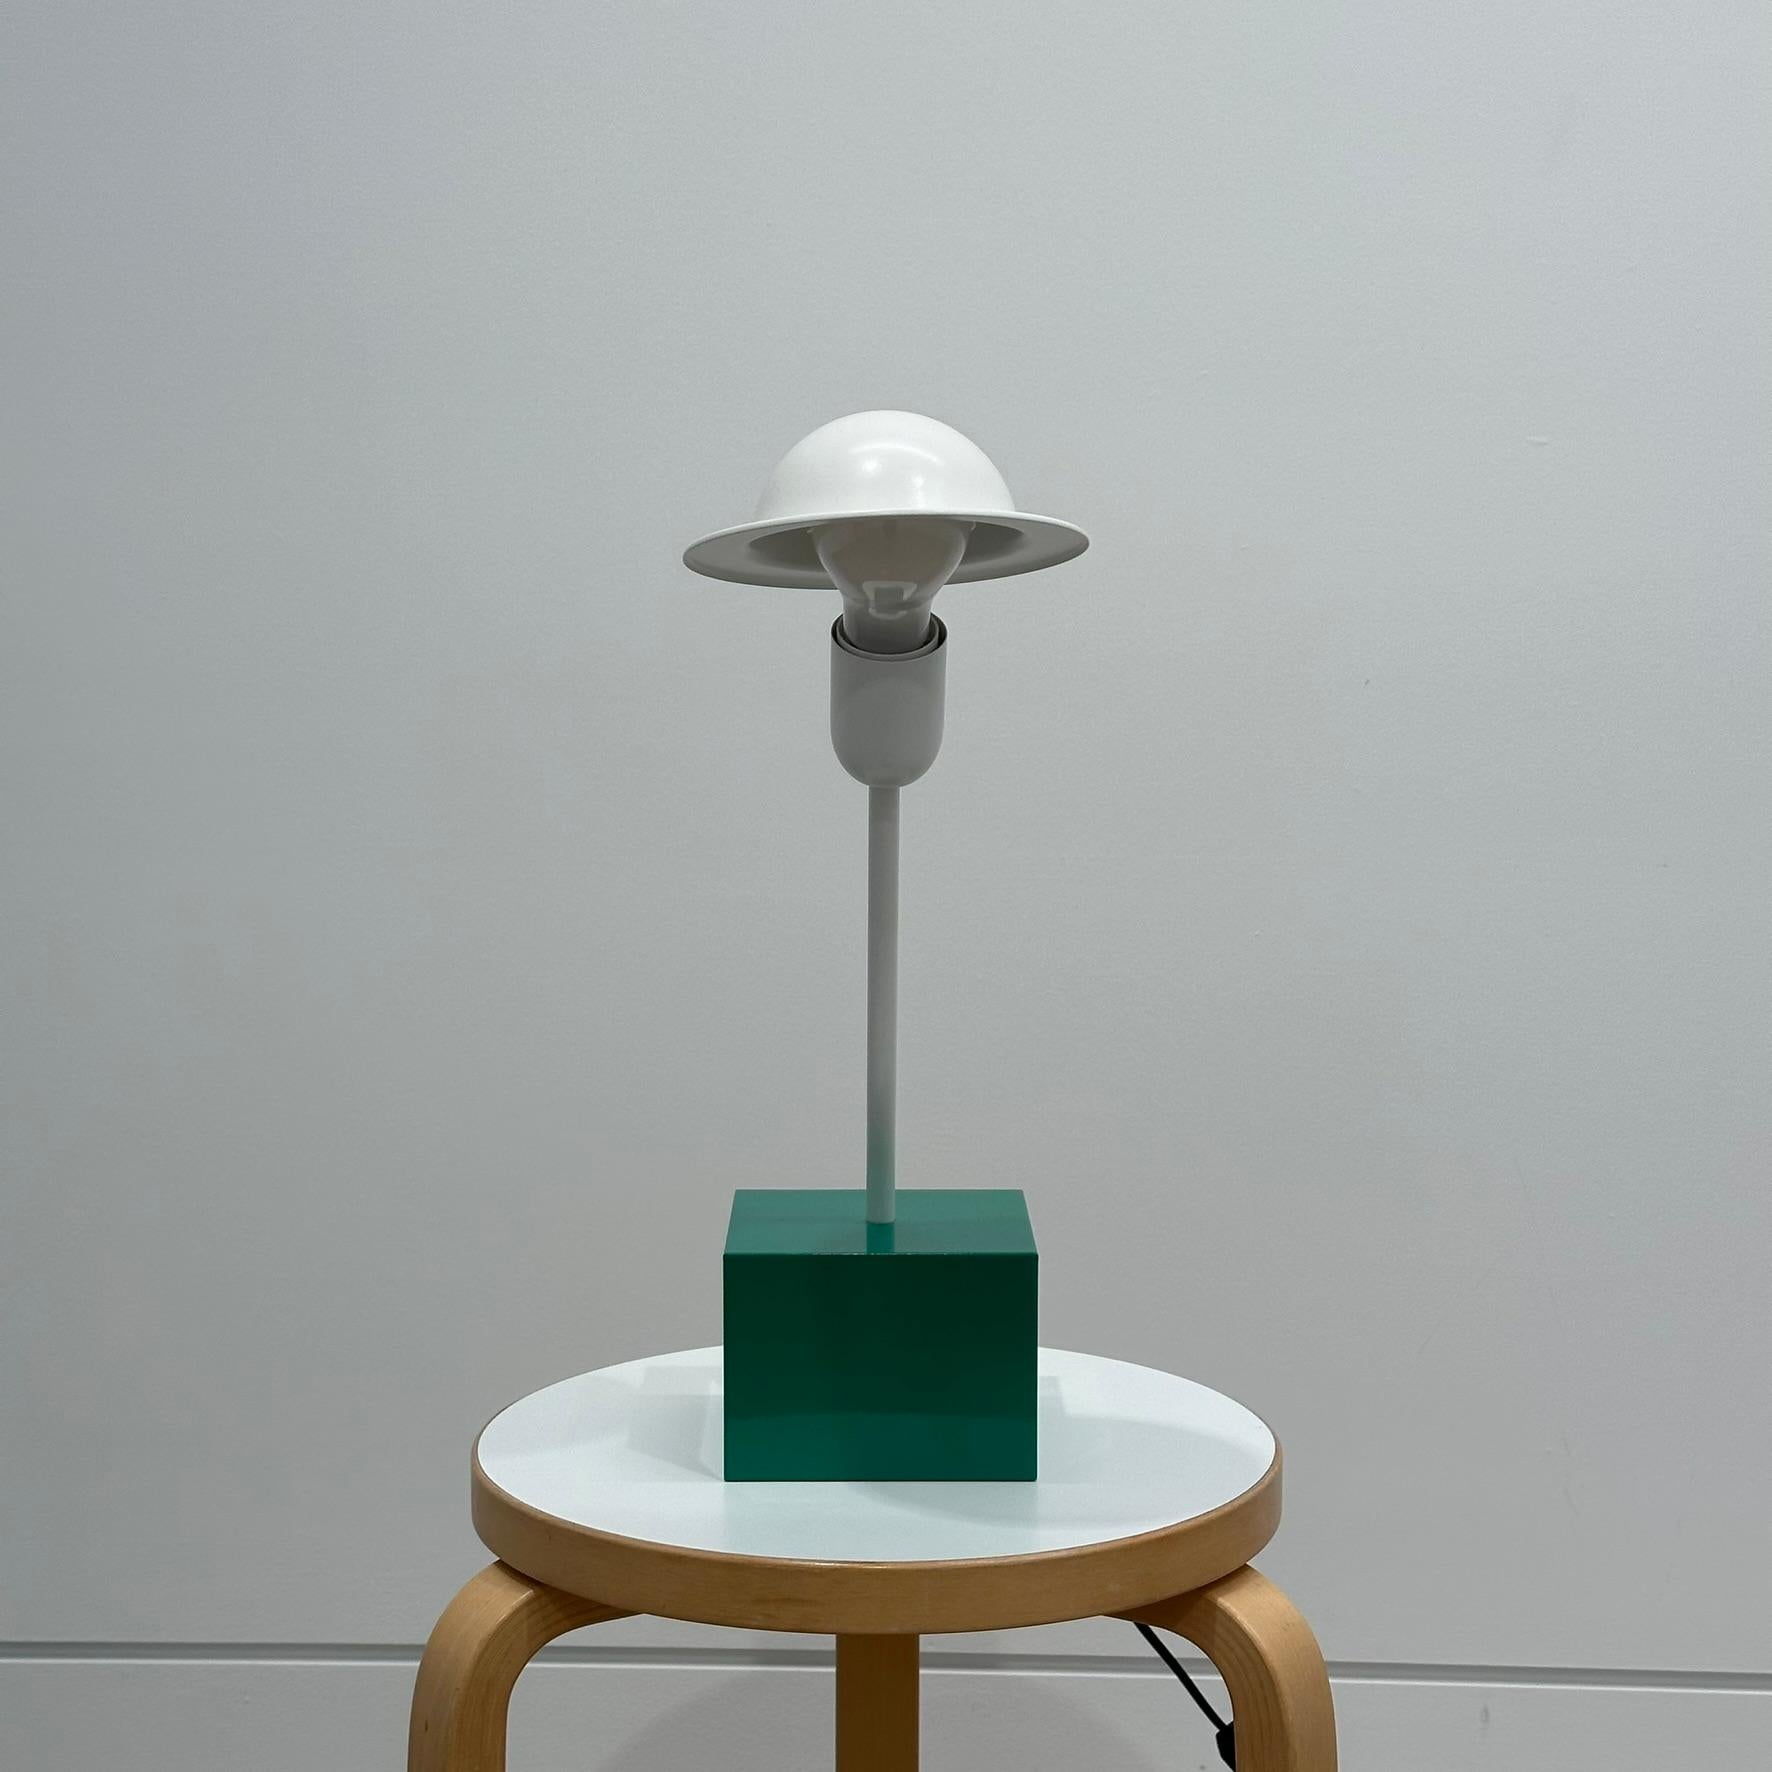 The lamp consists of a relative heavy emerald green cubic base, a white slanted rod and a striking adjustable white shade. This shade is connected to the light bulb with a white lacquered metal clip.